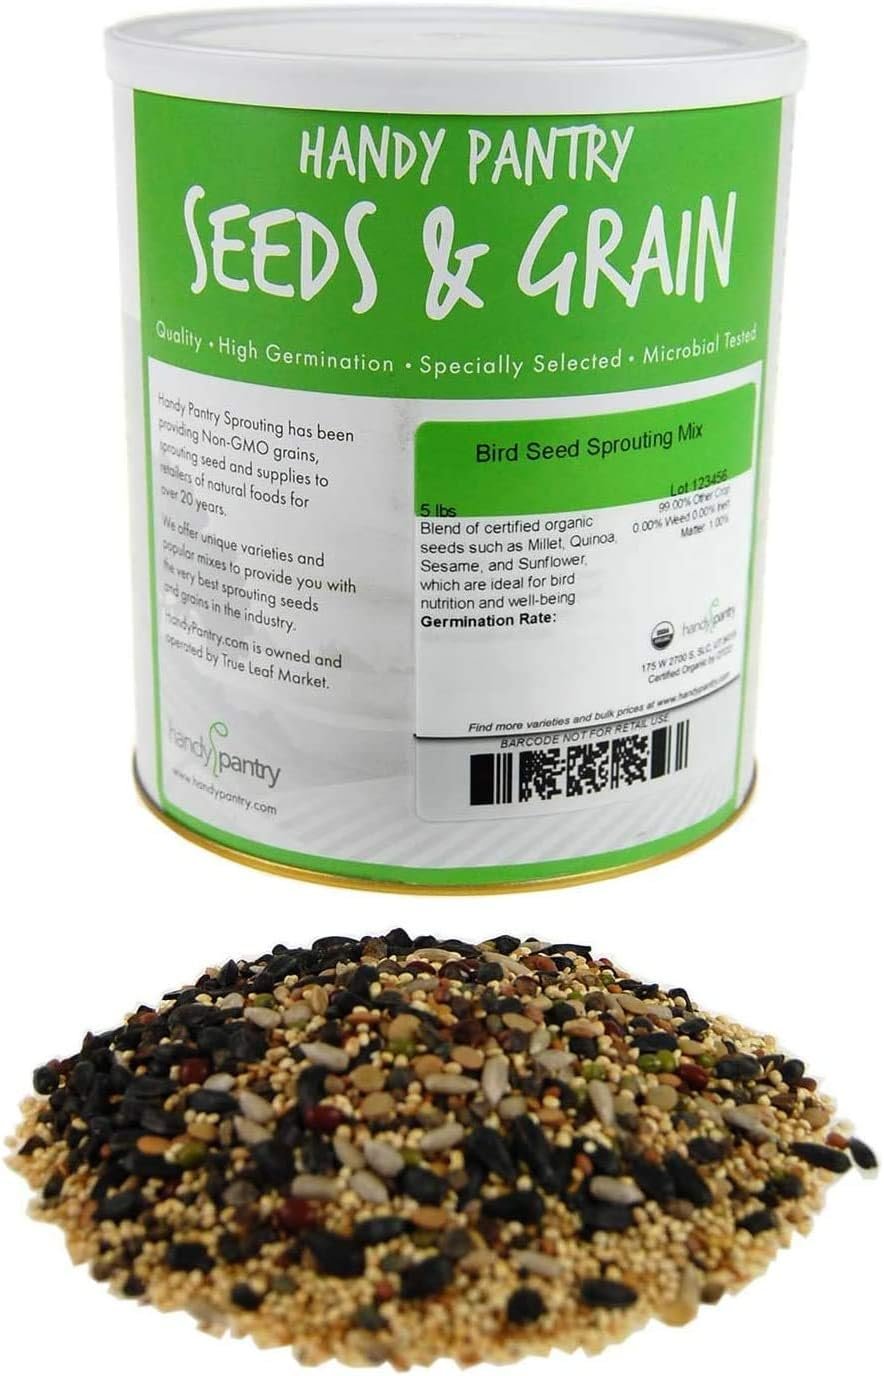 Handy Pantry Organic Birdseed - 5 Lb - Sprouting Bird Seed Mix for Small, Medium  Large Birds- Feed for Songbirds, Parakeets, Parrots, etc